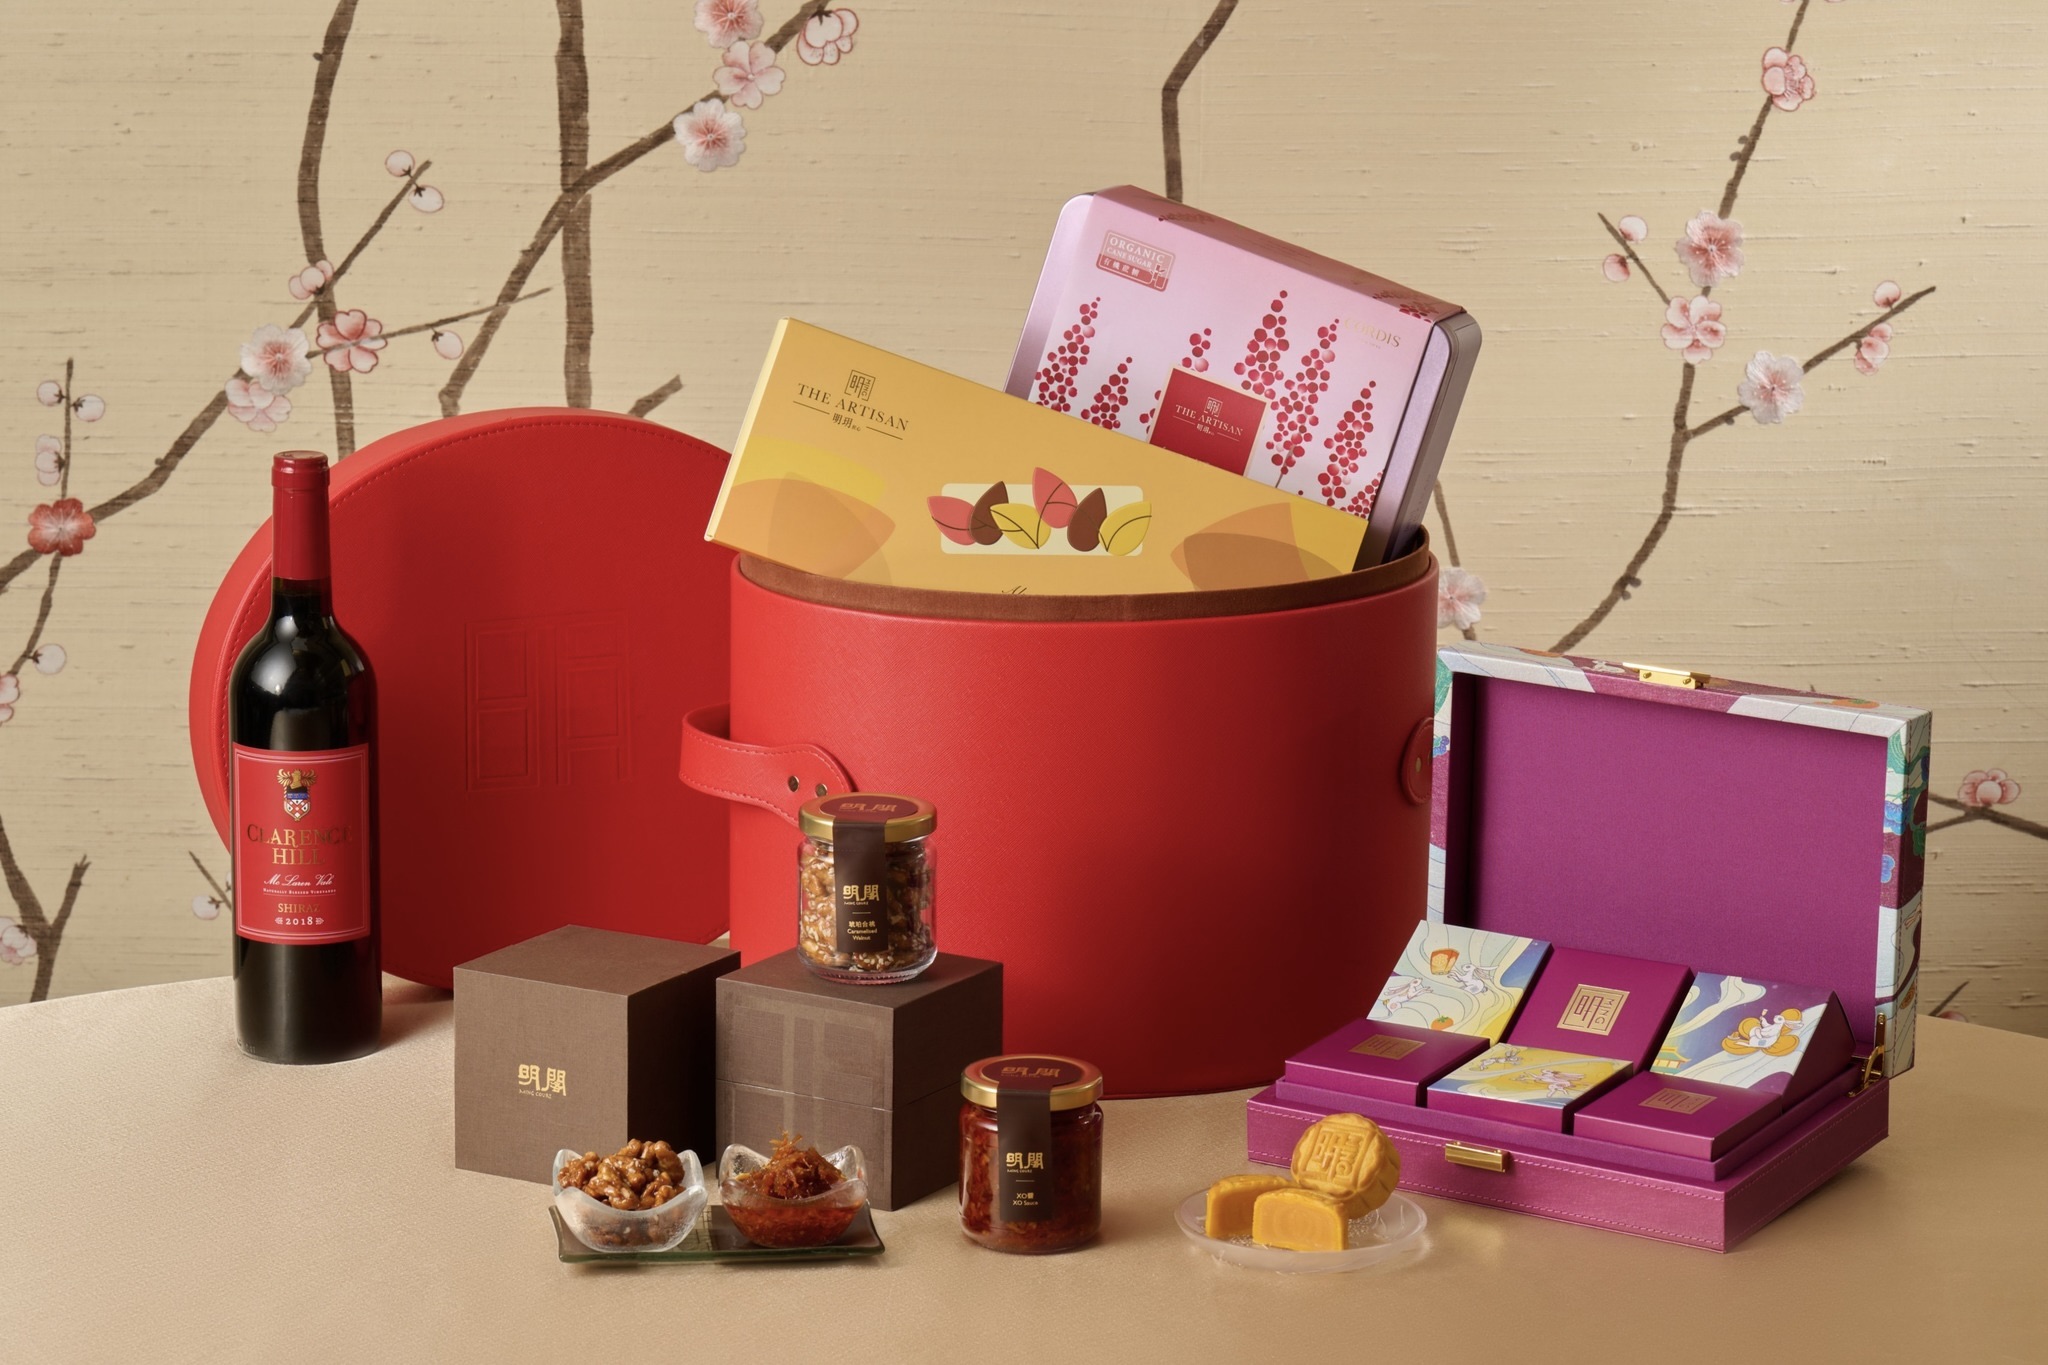 A festive mooncake hamper from Cordis with wine, caramelised walnuts, XO sauce, and mooncakes. The contents of the hamper come in a red cylindrical box containing square boxes with the nuts and sauce. There are other boxes that contain the mooncakes.